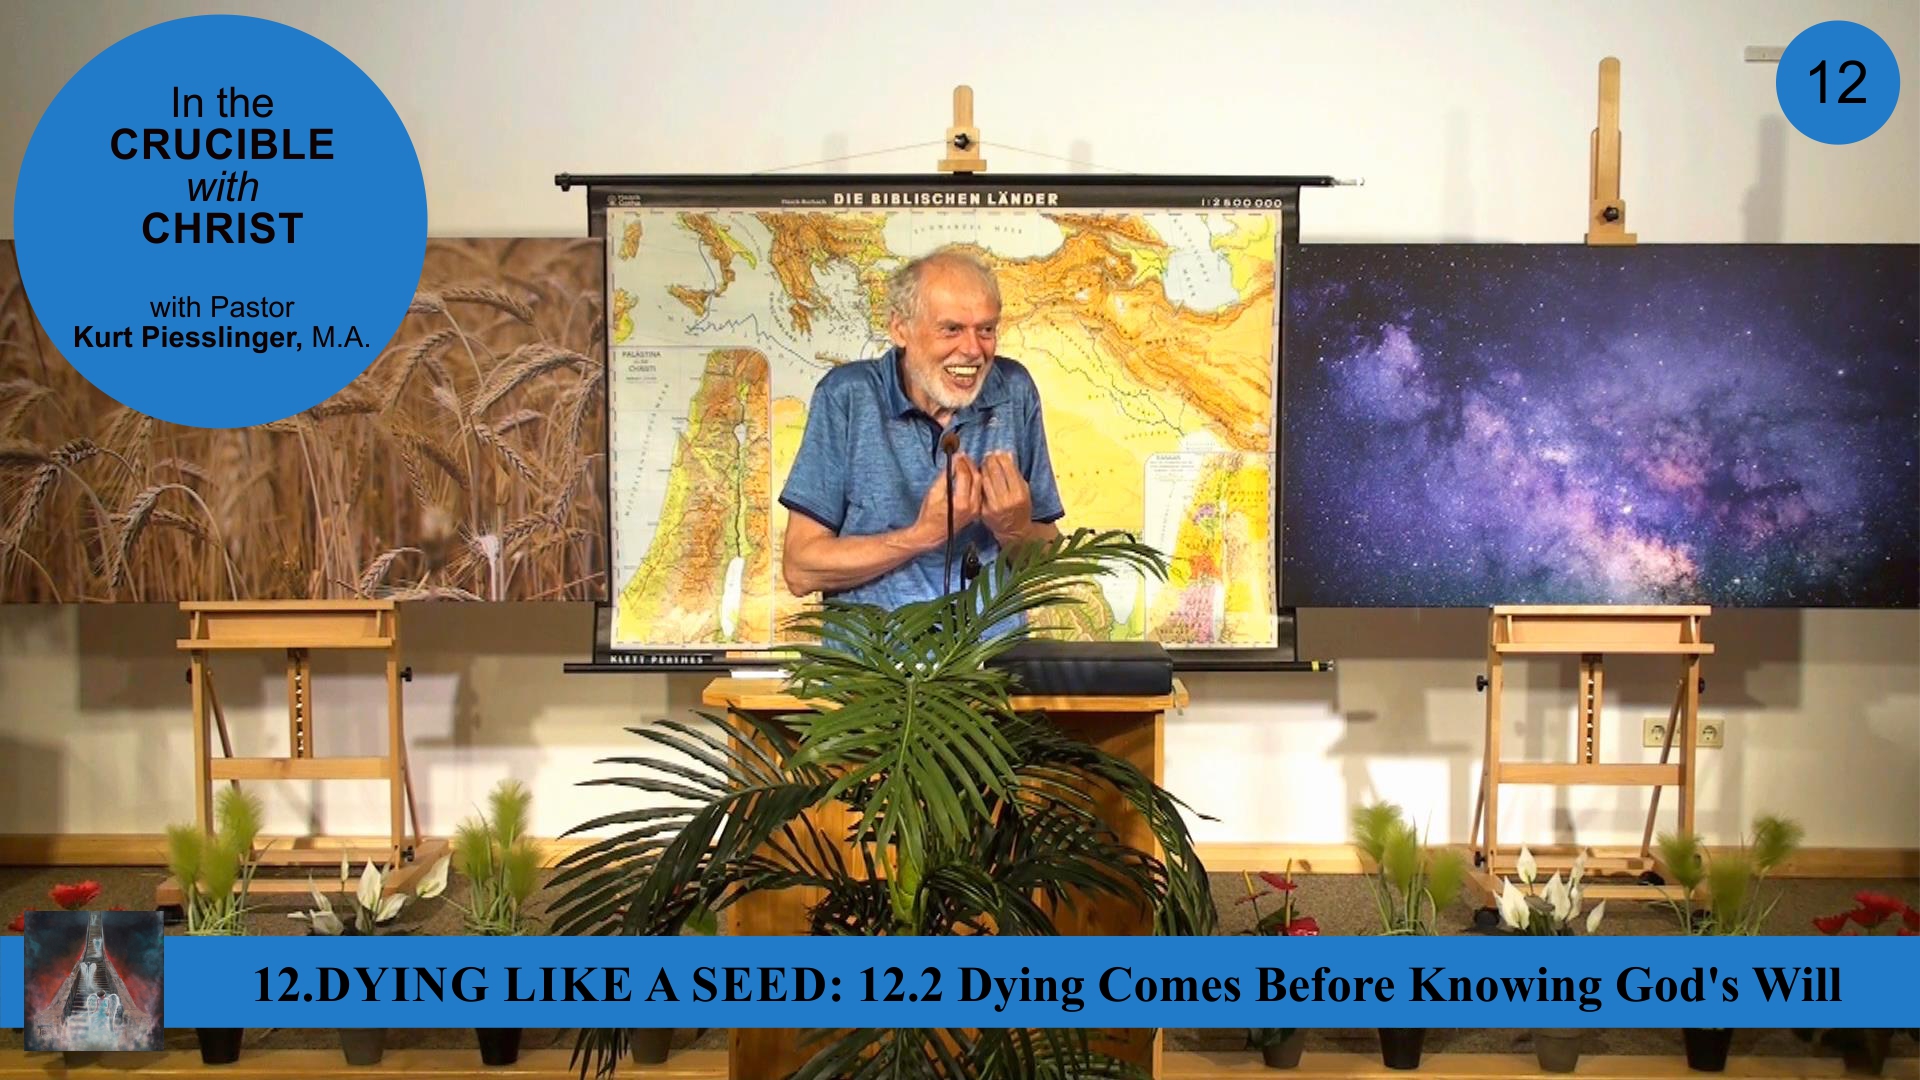 12.2 Dying Comes Before Knowing God’s Will – DYING LIKE A SEED | Pastor Kurt Piesslinger, M.A.